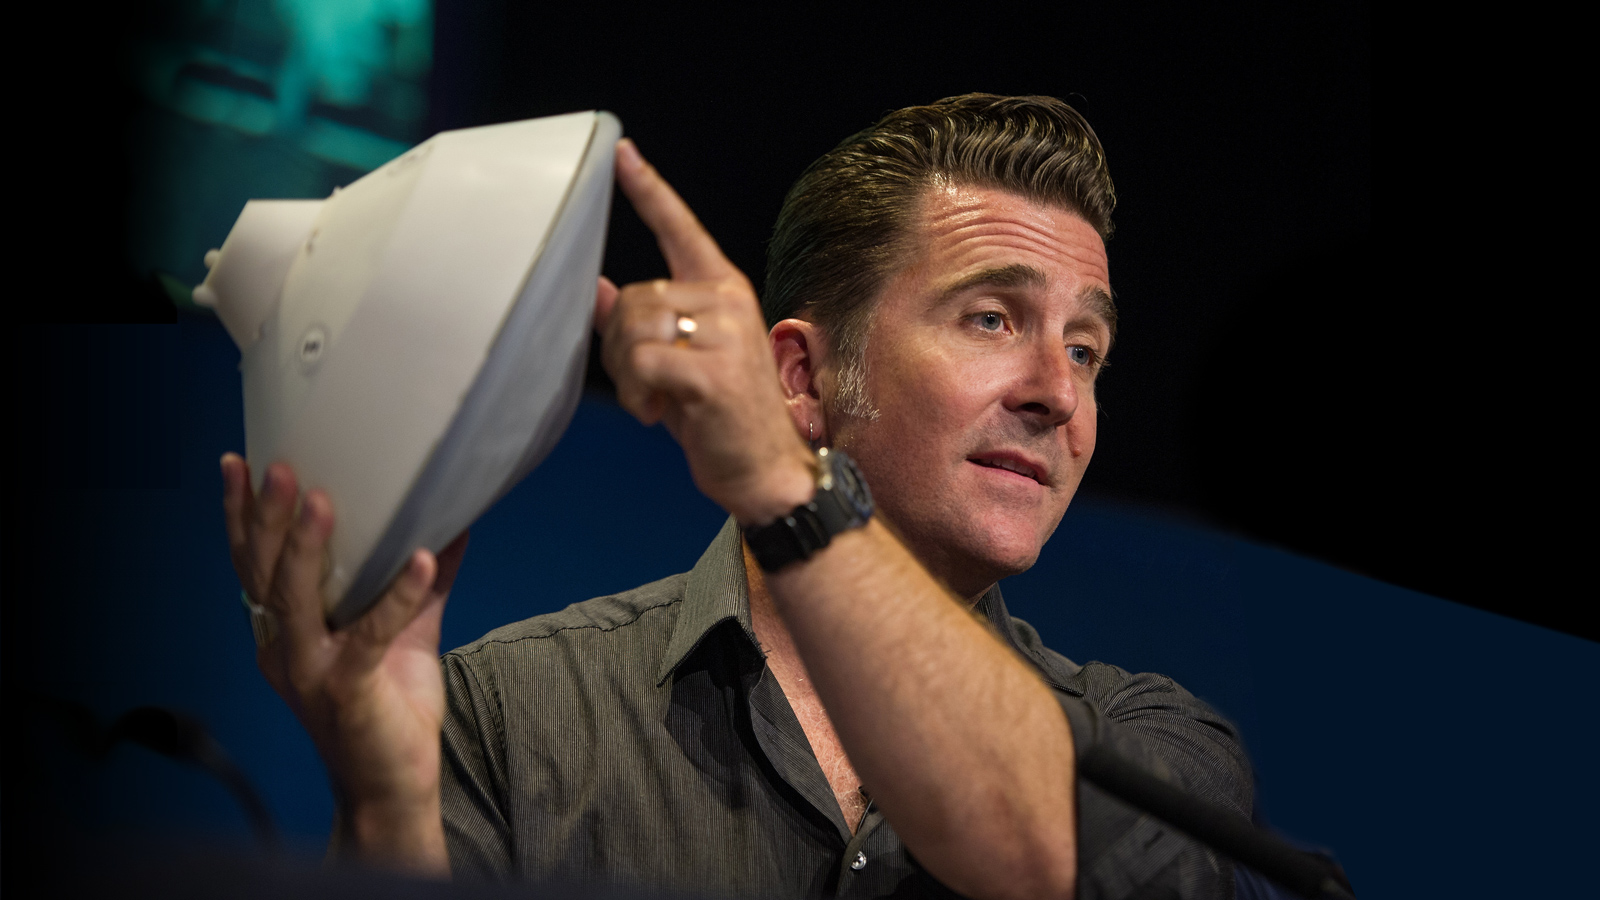 Adam Steltzner of JPL holds up a model of a Mars entry capsule.